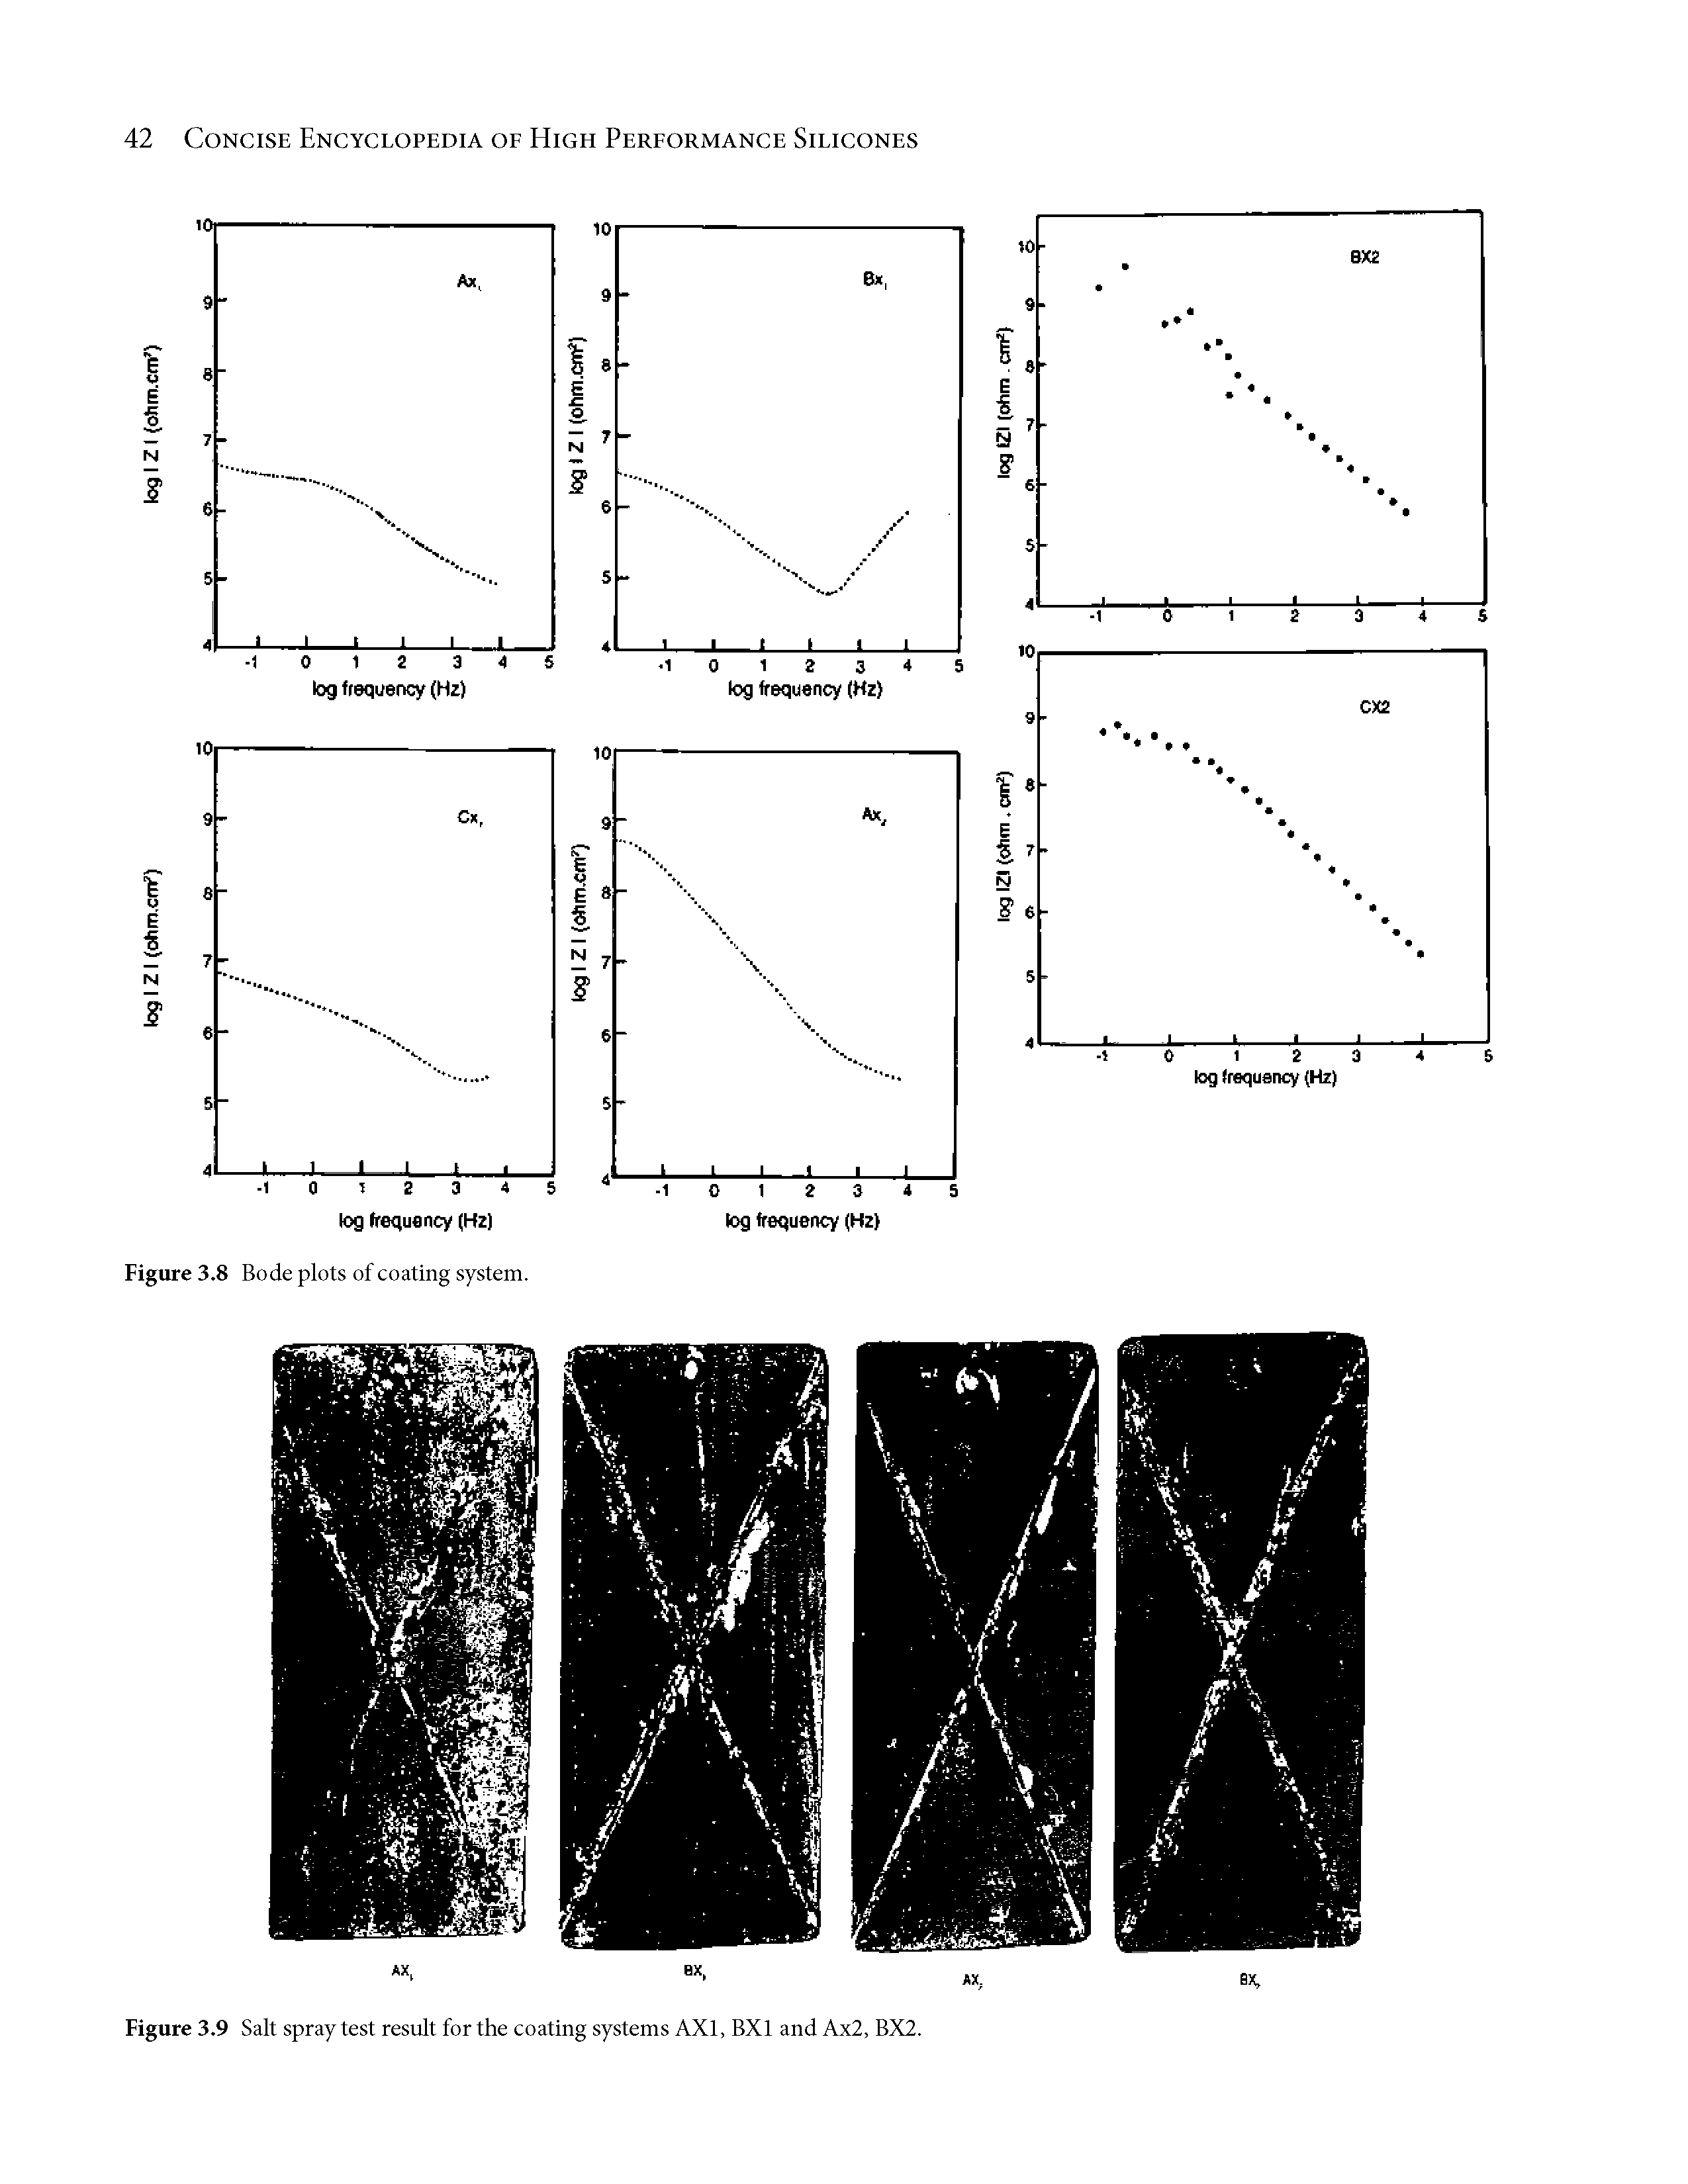 Figure 3.9 Salt spray test result for the coating systems AXl, BXl and Ax2, BX2.